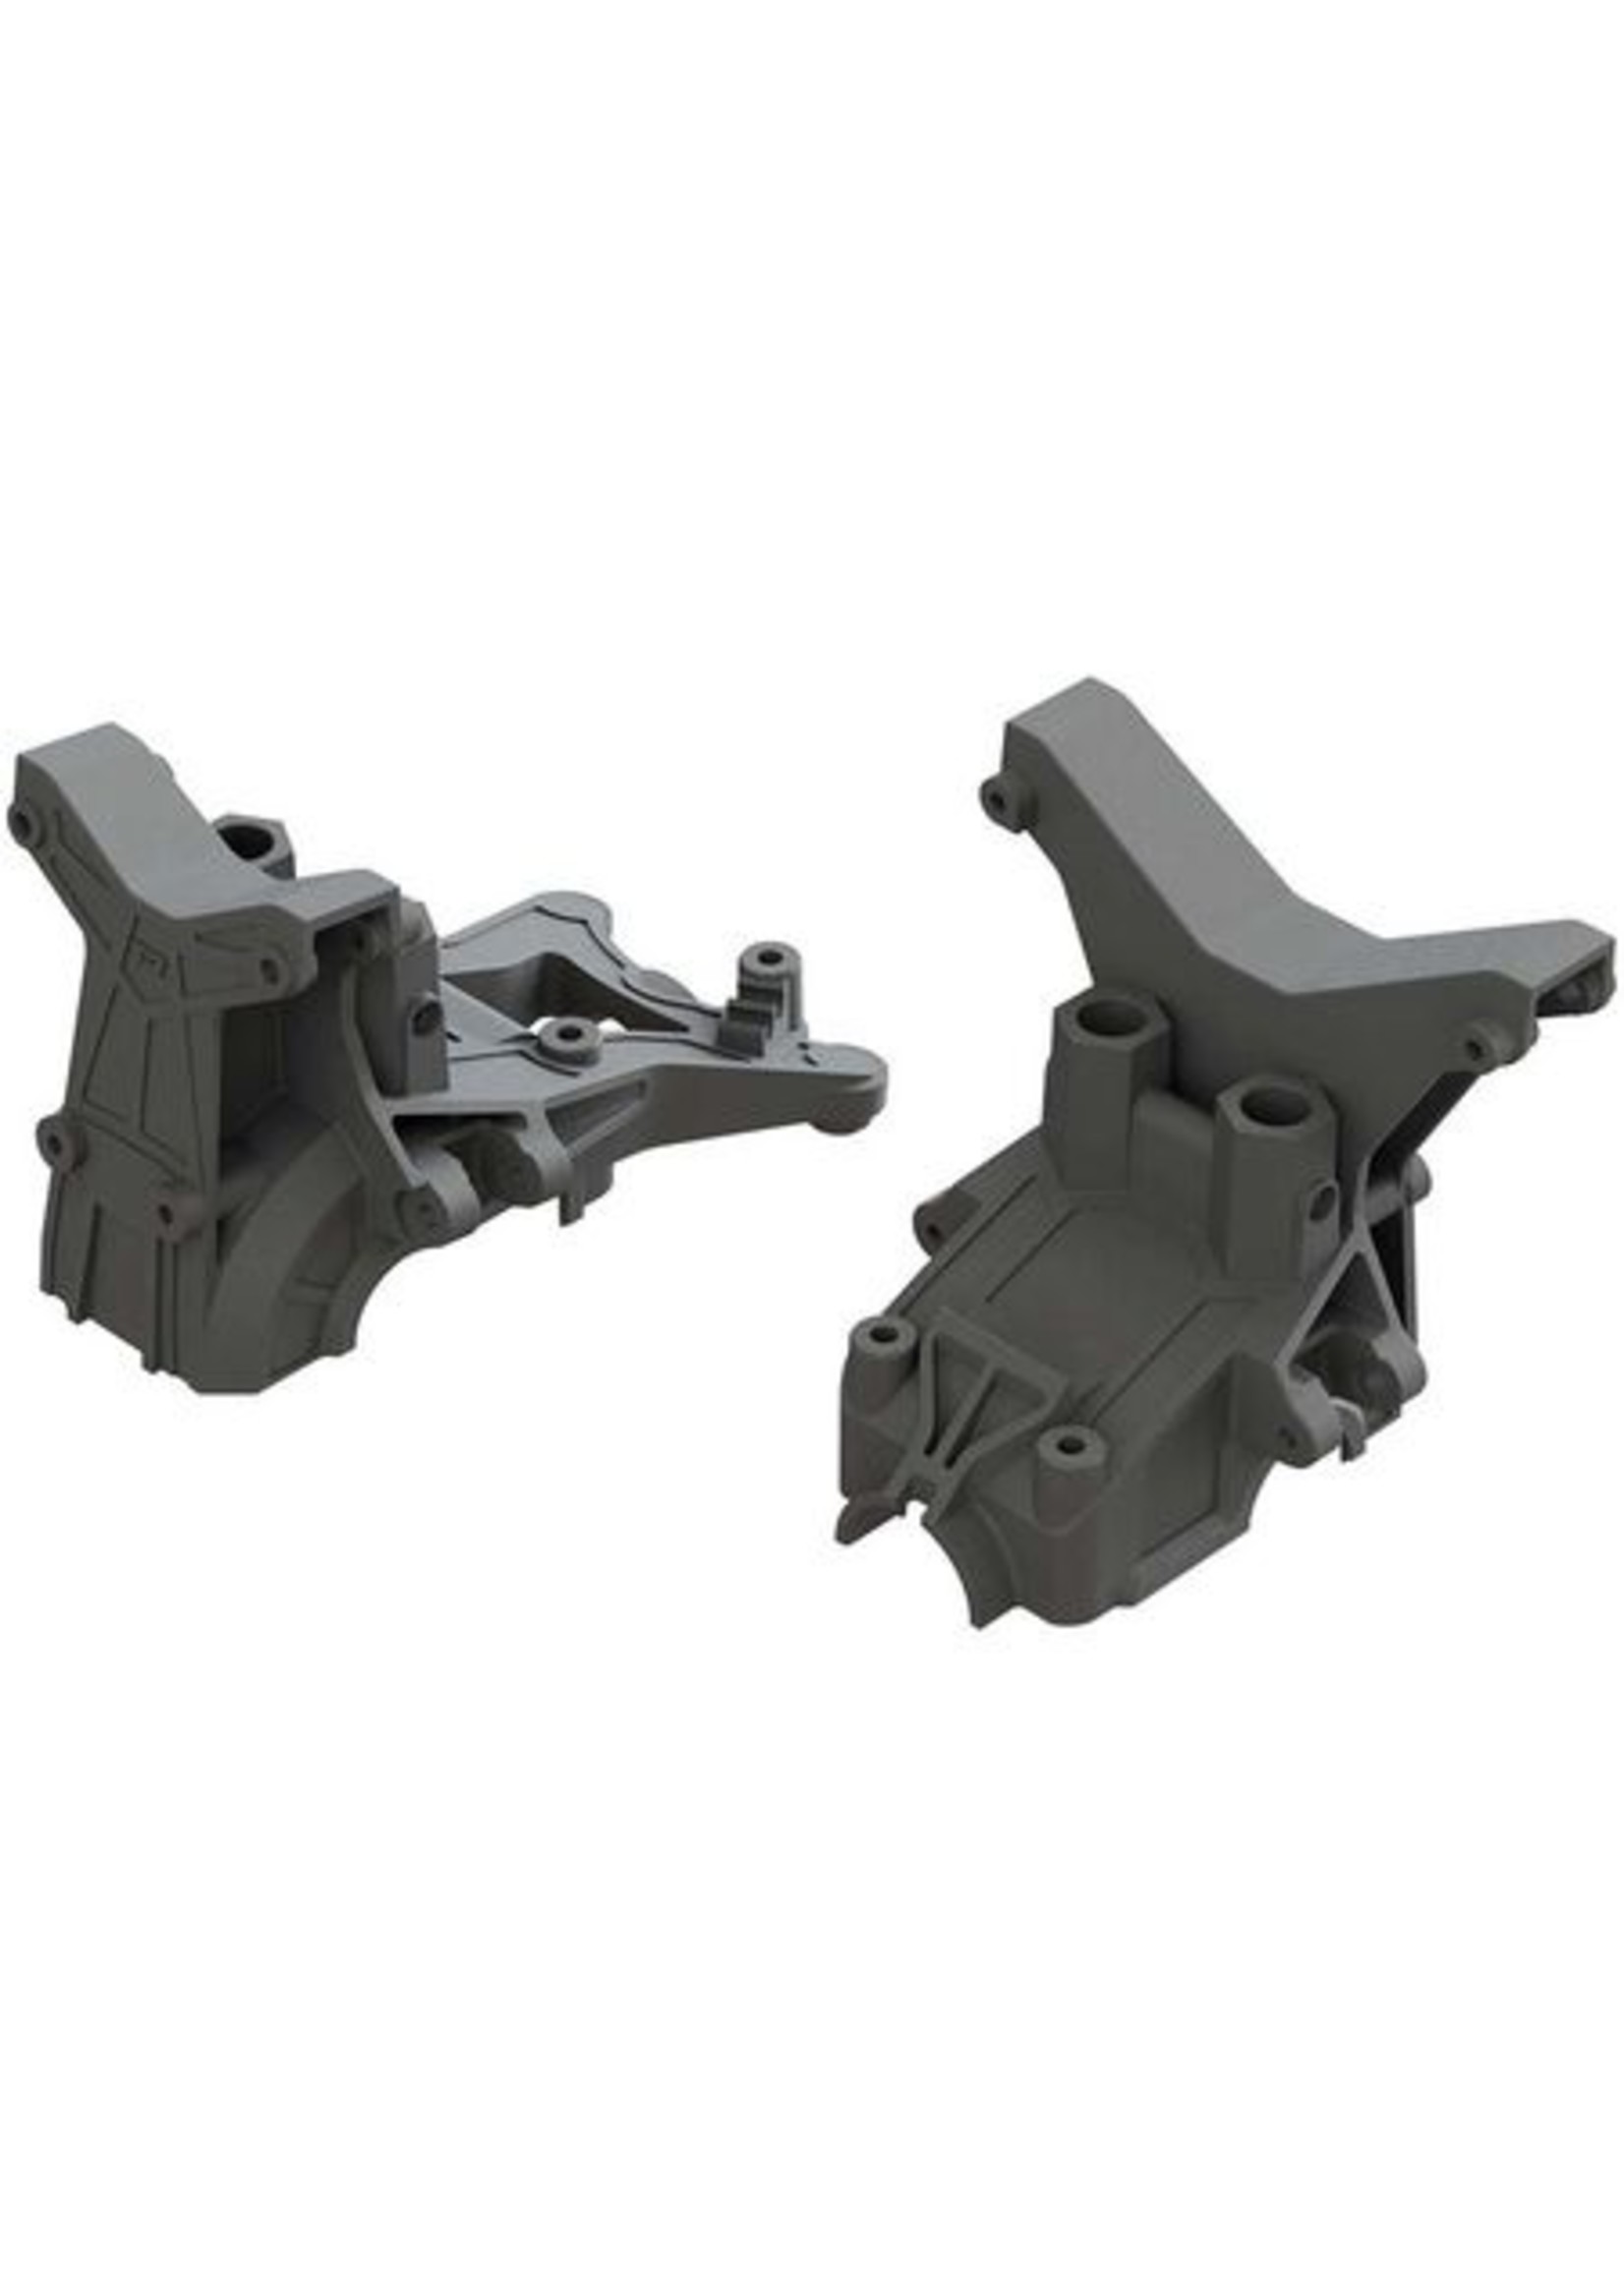 Arrma AR320399 - Composite Front Rear Upper Gearbox Covers and Shock Tower